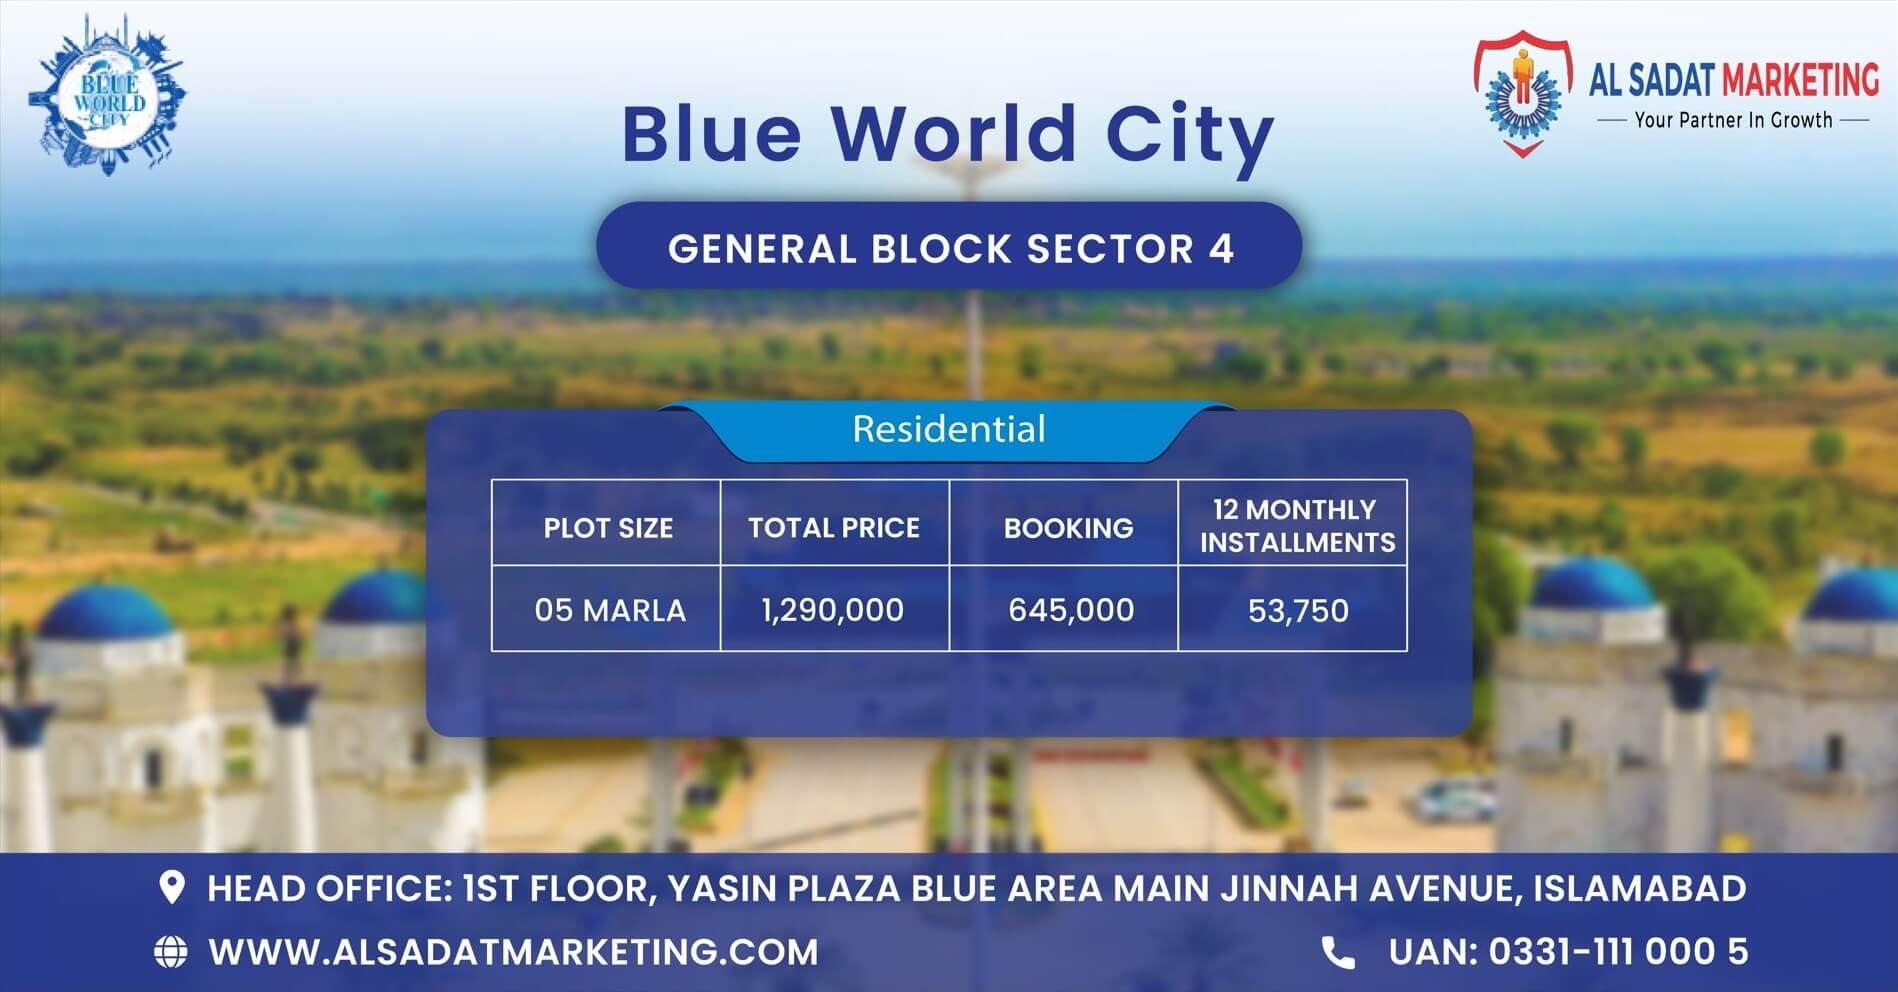 blue world city residential plots payment plan – blue world city islamabad residential plots payment plan – blue world city rawalpindi residential plots payment plan – blue world city general block sector 4 new payment plan – blue world city islamabad general block 4 new payment plan – blue world city rawalpindi general block sector 4 new payment plan – blue world city payment plan – blue world city islamabad payment plan - blue world city rawalpindi payment plan – blue world city– blue world city islamabad – blue world city rawalpindi– blue world city housing society – blue world city islamabad housing society – blue world city real estate project – blue world city islamabad real estate project - al sadat marketing - alsadat marketing - al-sadat marketing